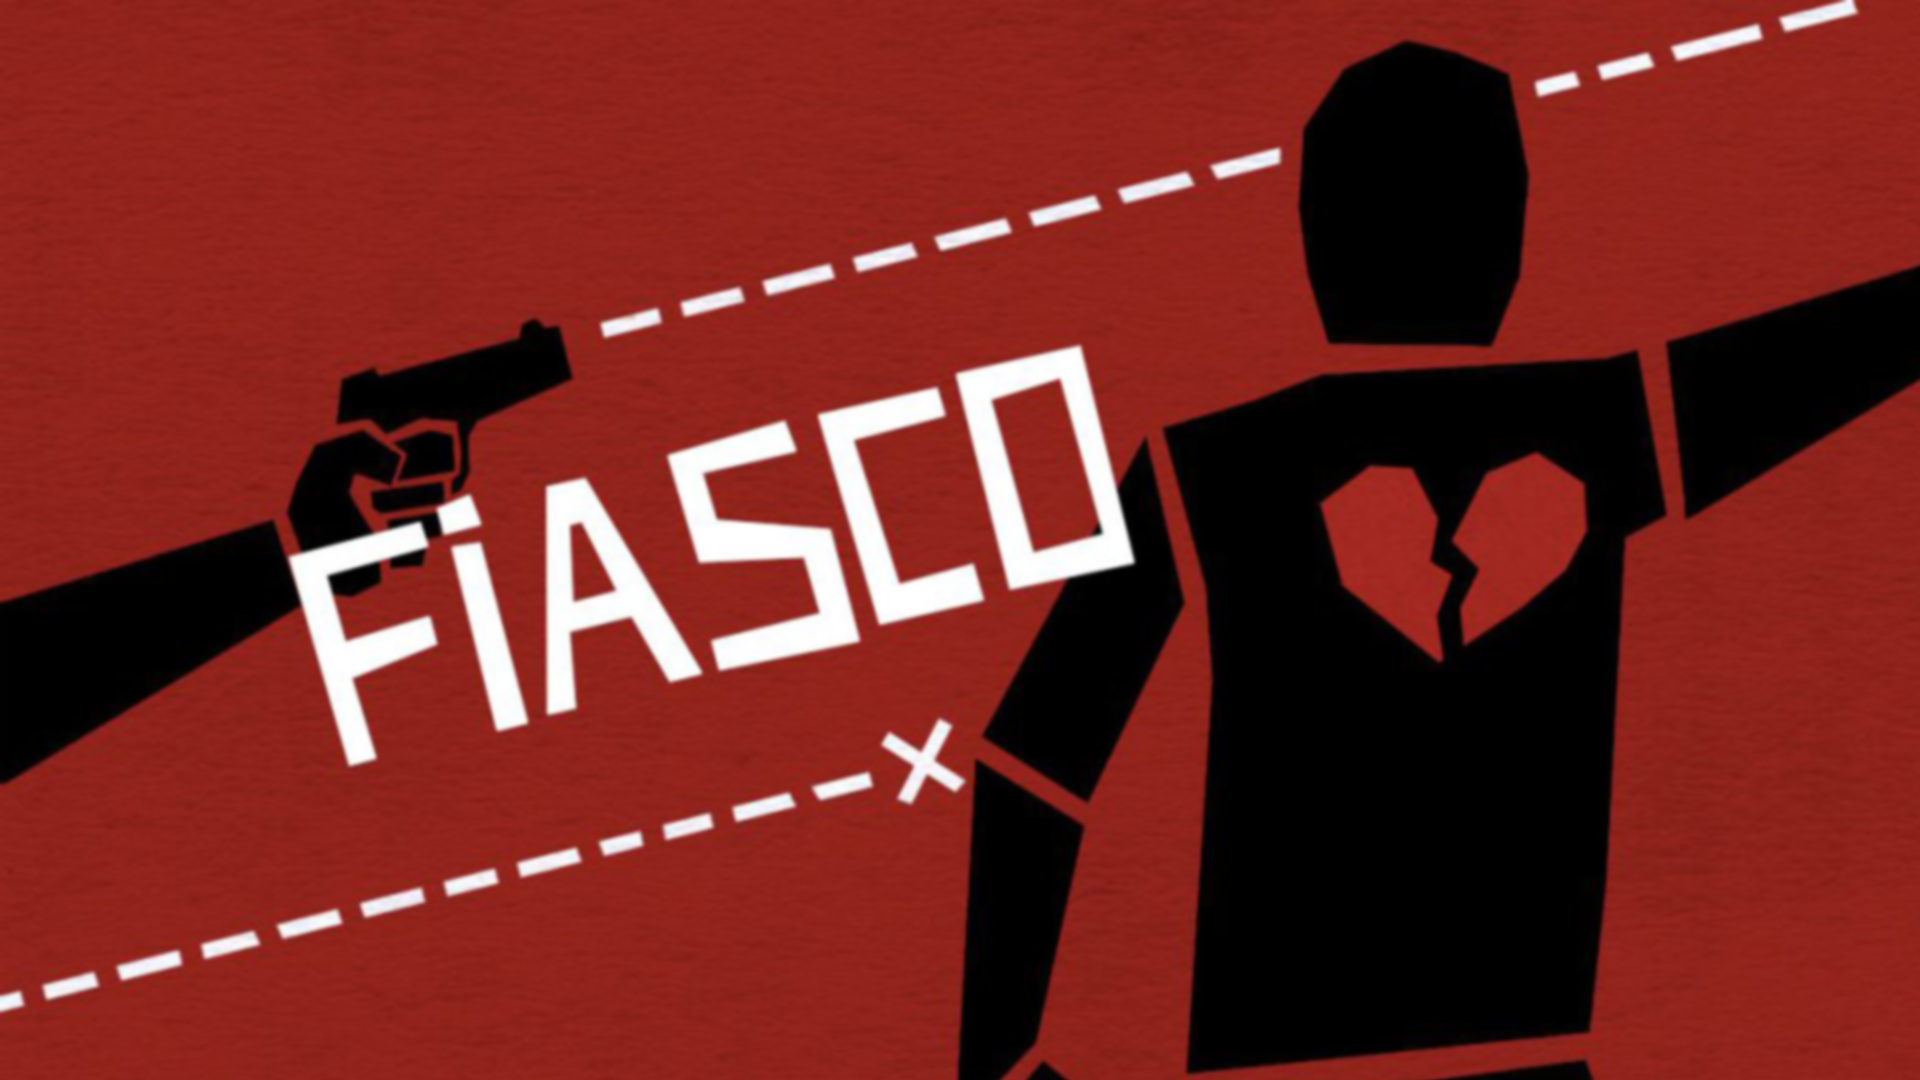 Fiasco, an easy tabletop RPG game that's fantastic for generating stories.